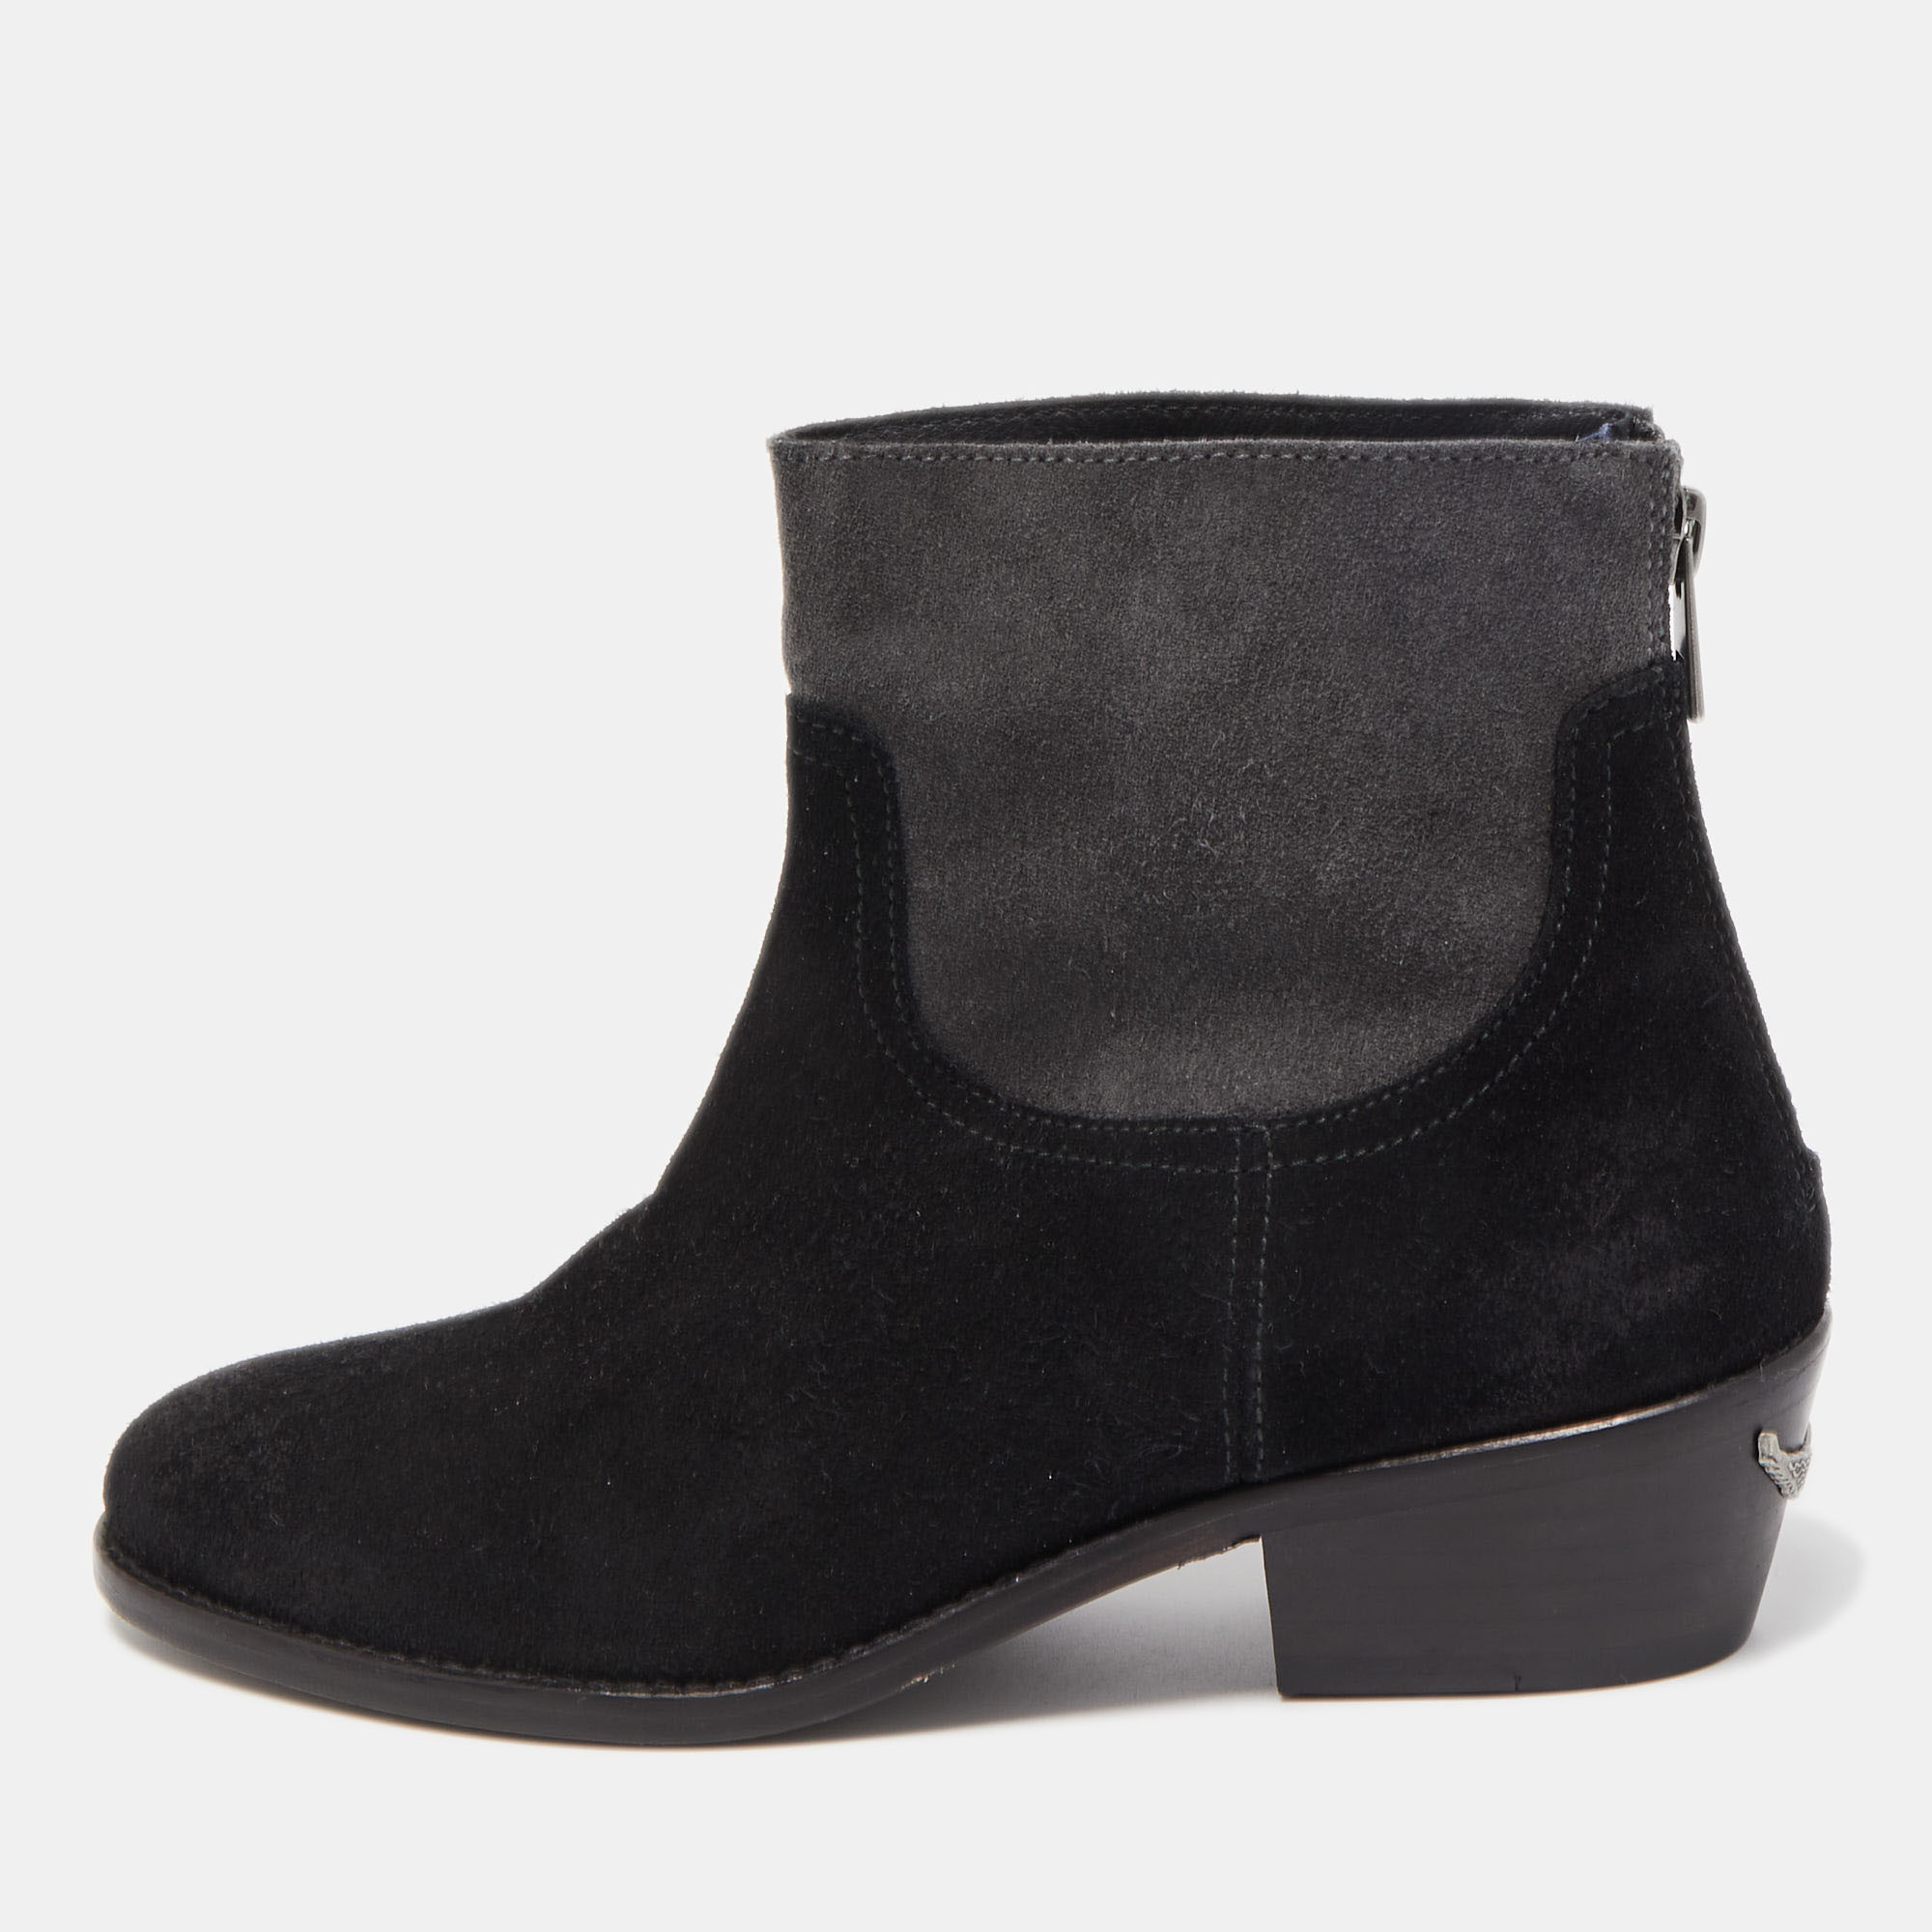 Zadig & voltaire black suede ankle boots size 36